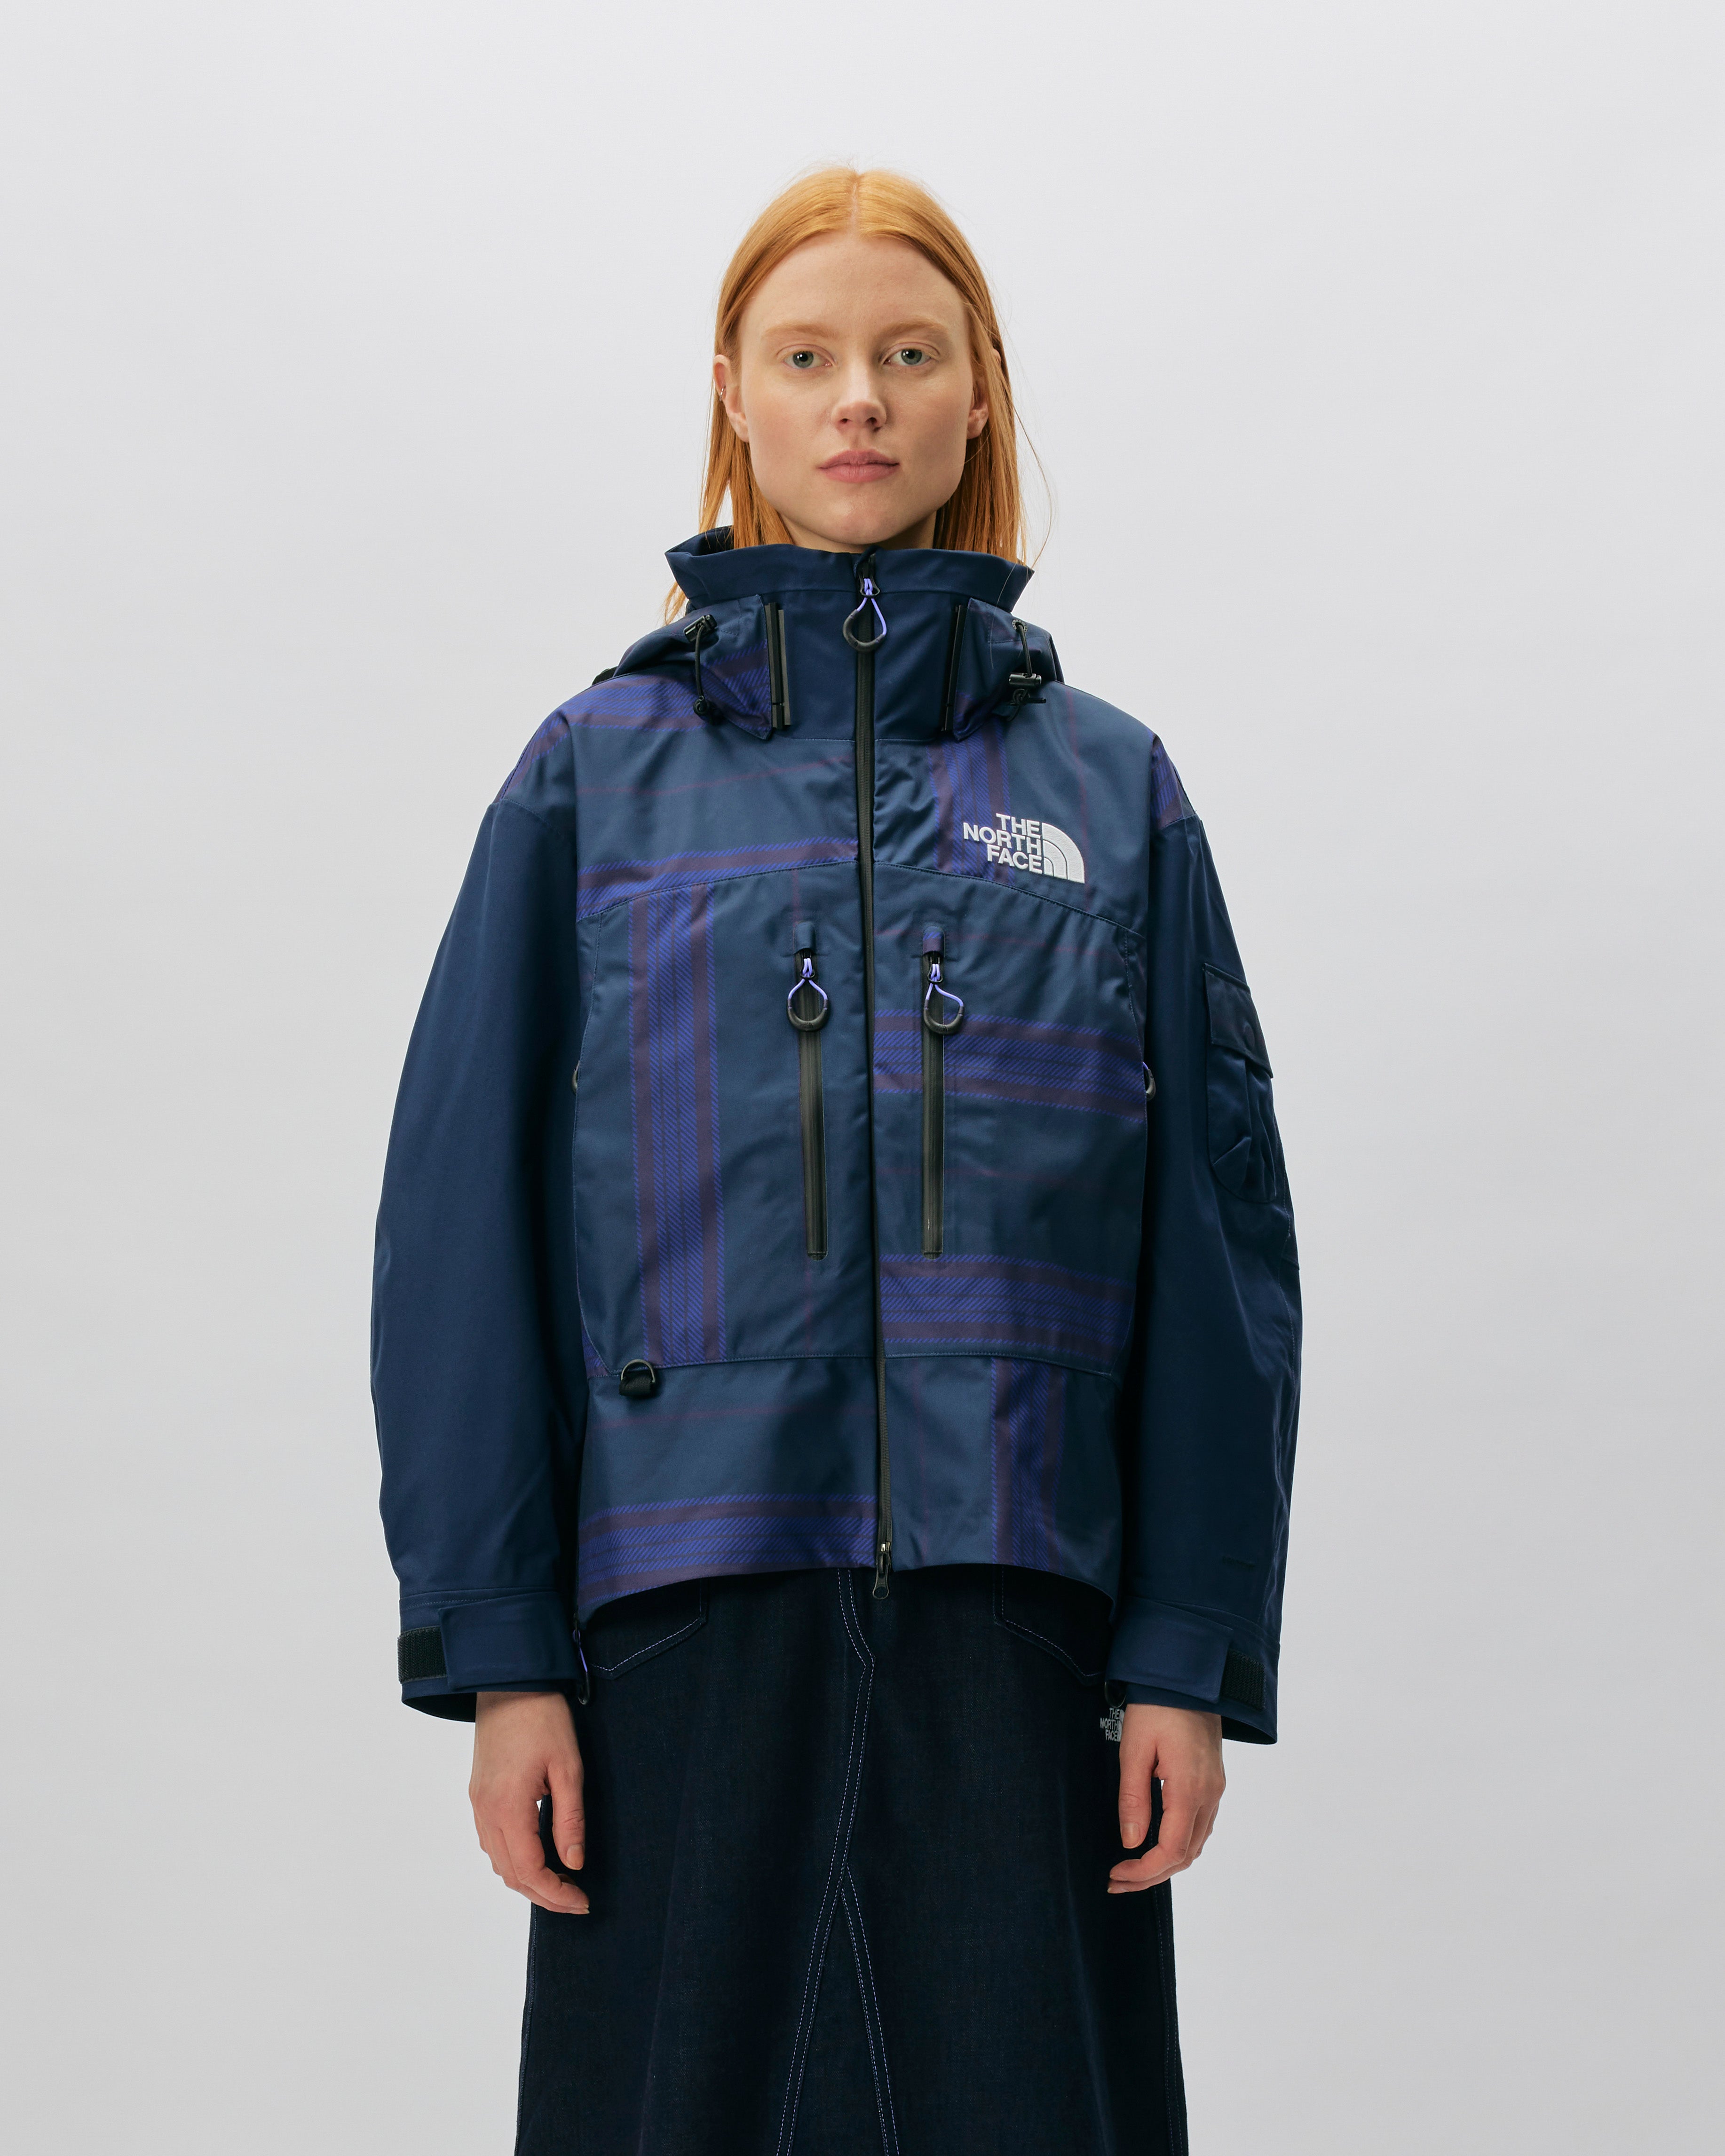 THE NORTH FACE Piecework Jacket SUMMIT NAVY NF0A884ZSPI1